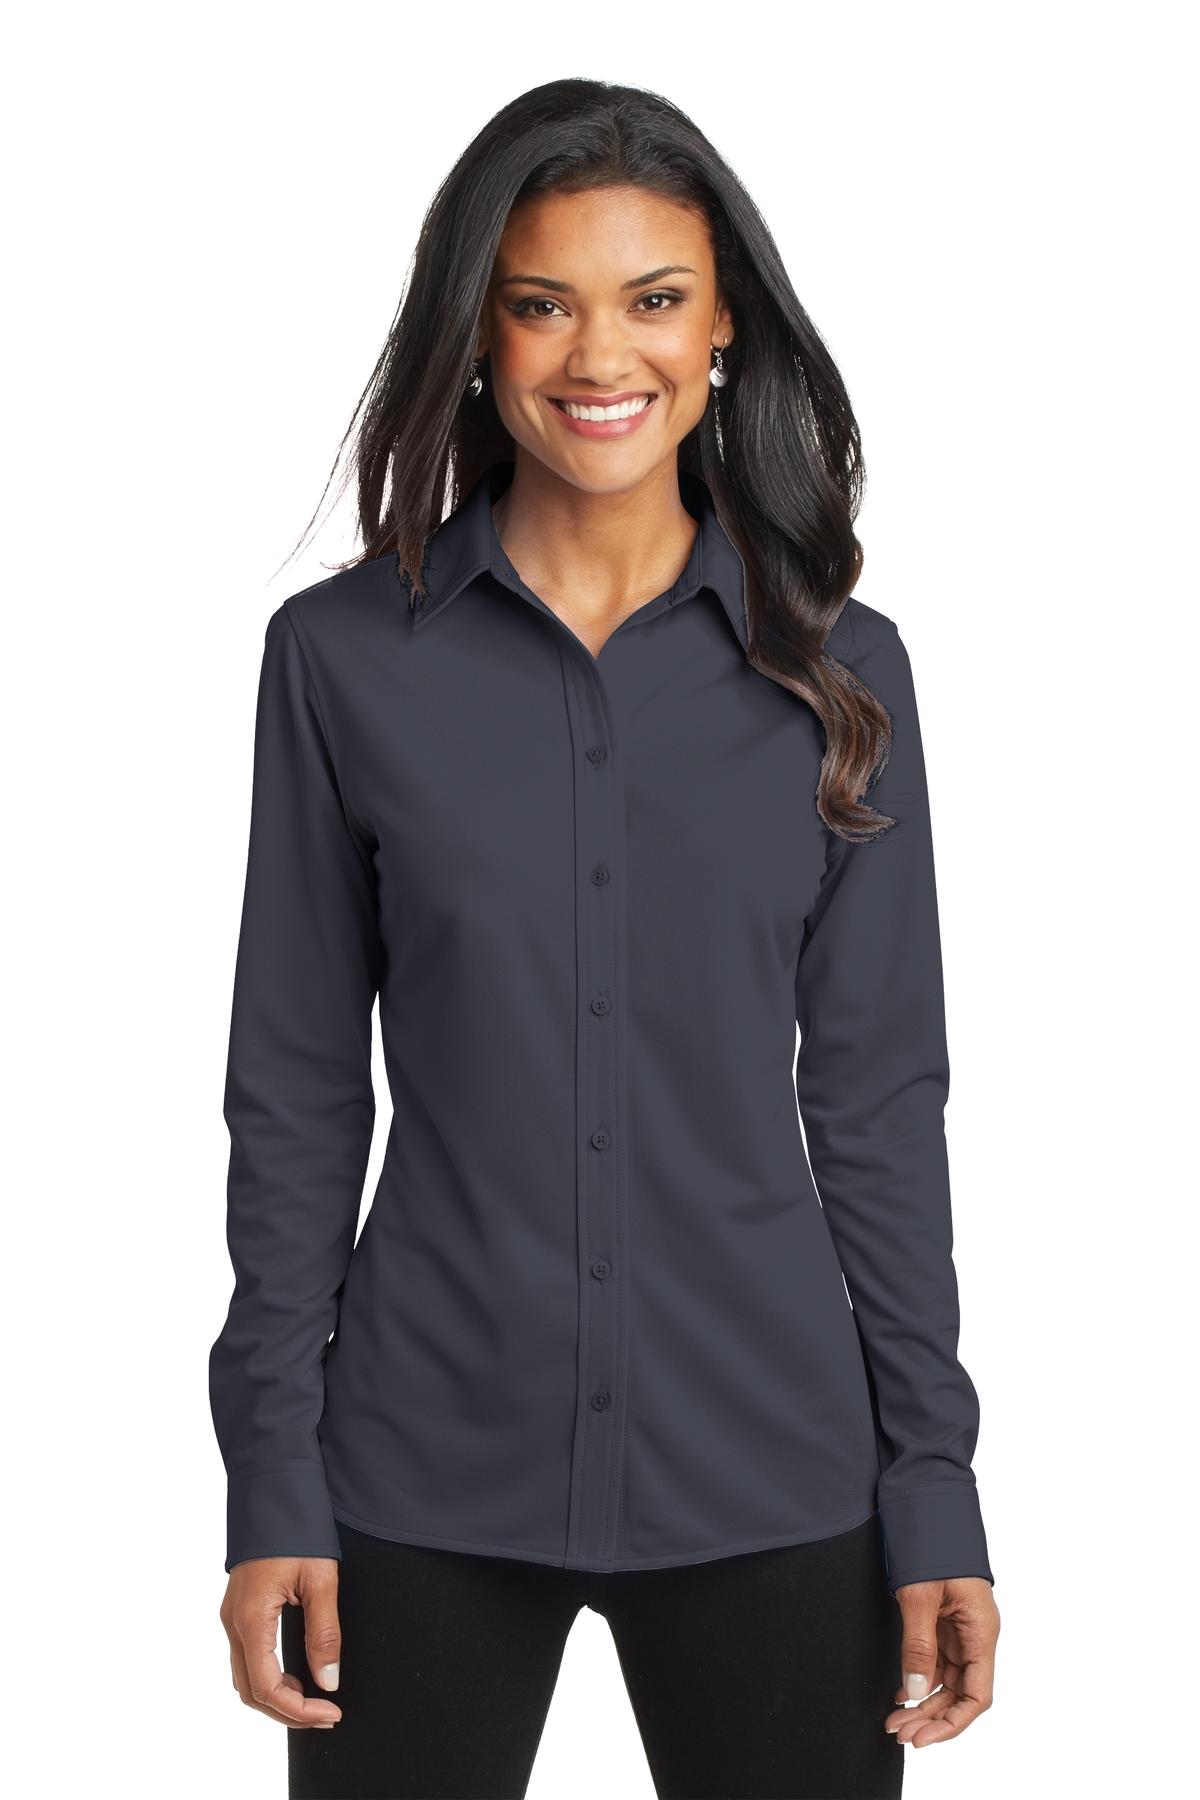 Port Authority Hospitality Ladies Polos&Knits,Woven Shirts ® Ladies Dimension Knit Dress Shirt.-Port Authority